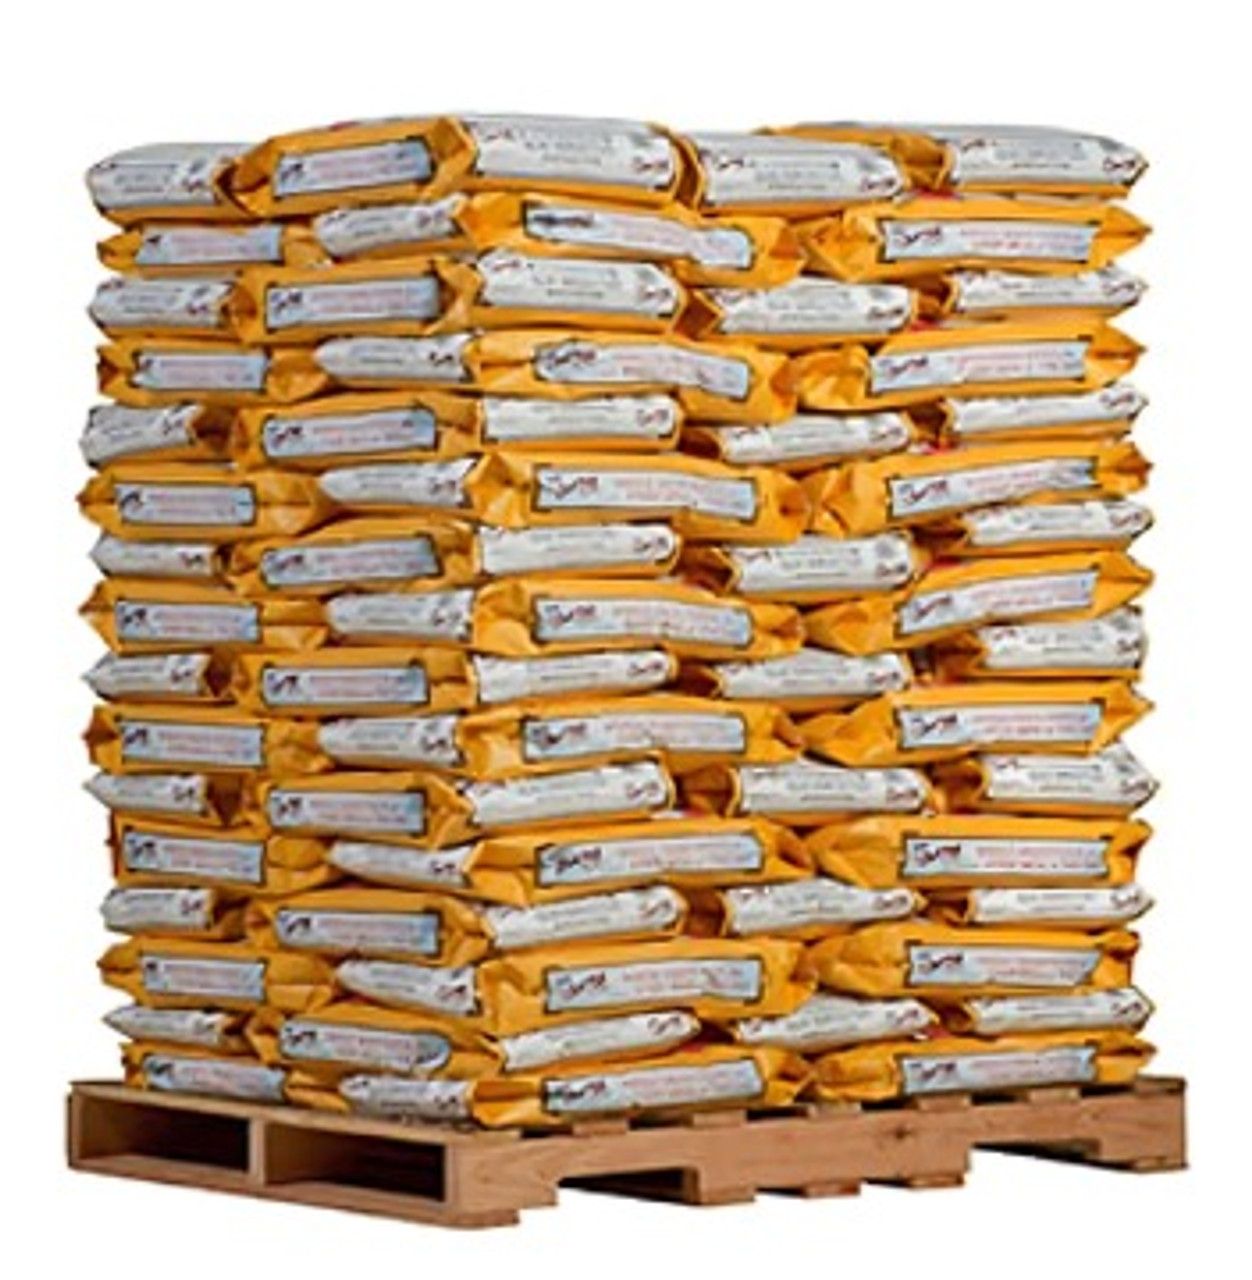 Bob's Red Mill 25 lbs. (11.34 kg) Organic White Quinoa (60 BAGS/PALLET) - Chicken Pieces